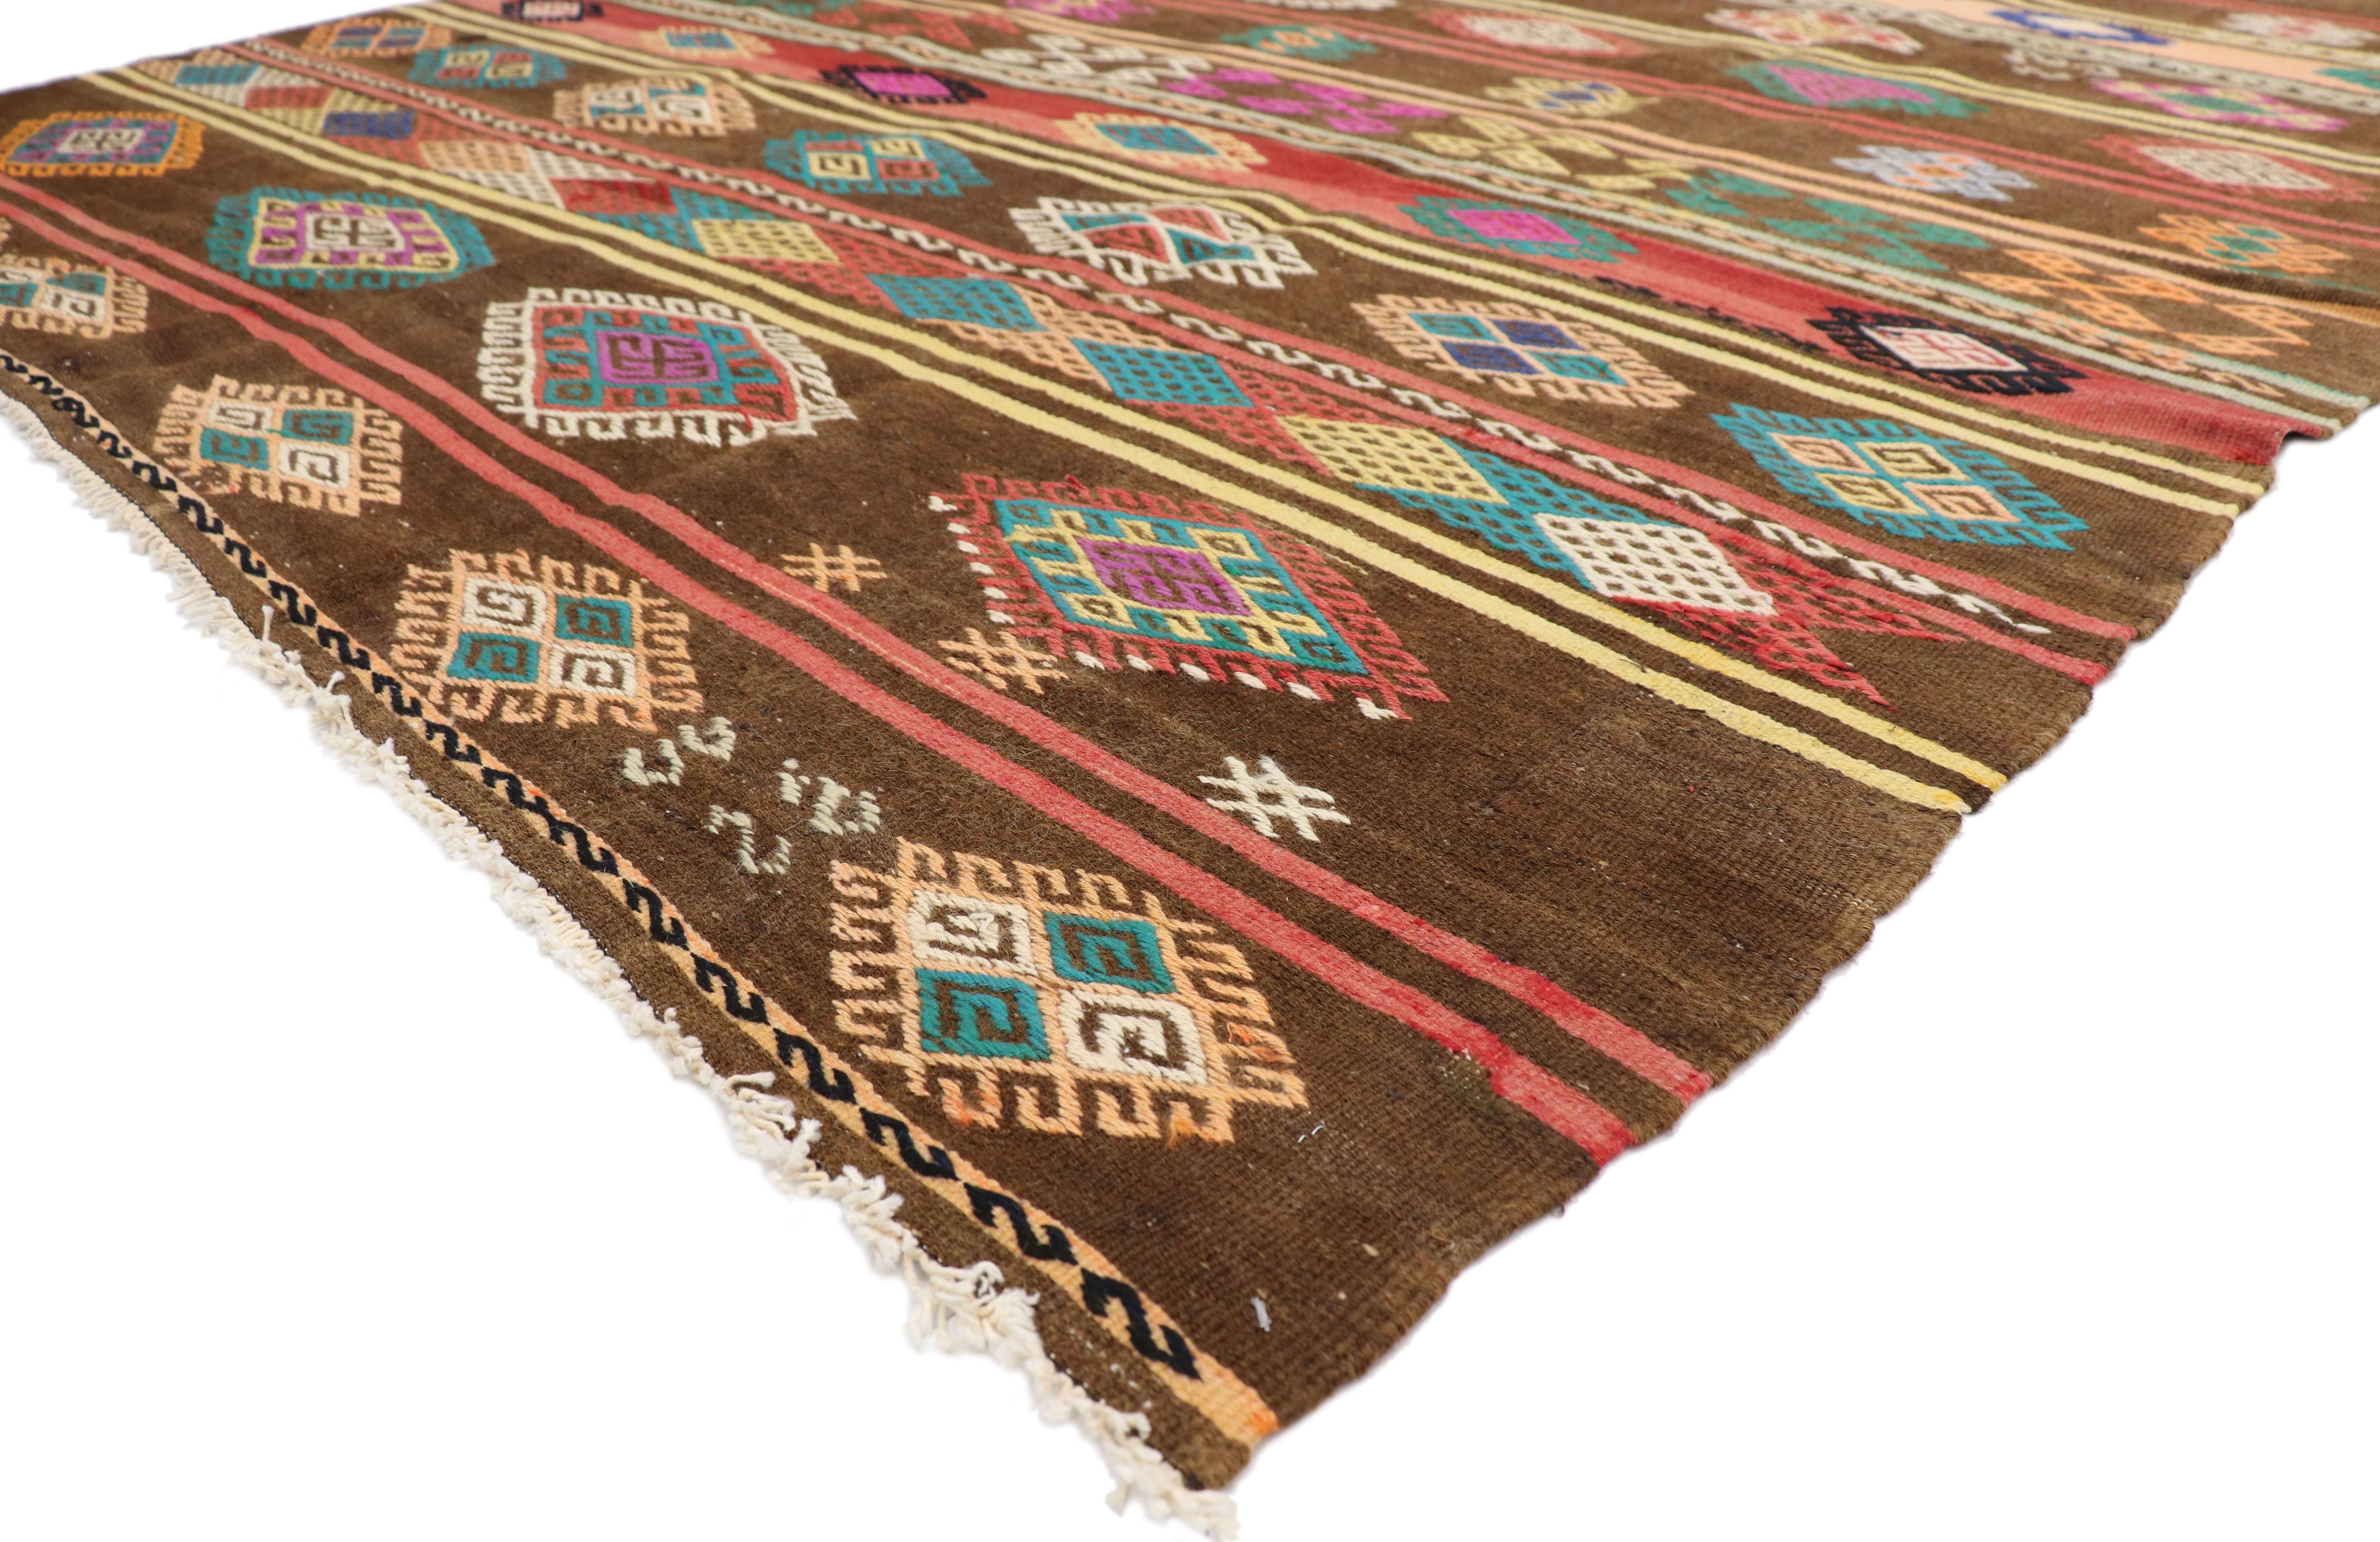 51069, colorful vintage Turkish Balikesir Jajim Kilim rug with Boho Tribal style, flat-weave rug. This handwoven wool vintage Turkish Balikesir Kilim rug features a series of stripes and bands with embroidered symbolic Jajim tribal motifs. This